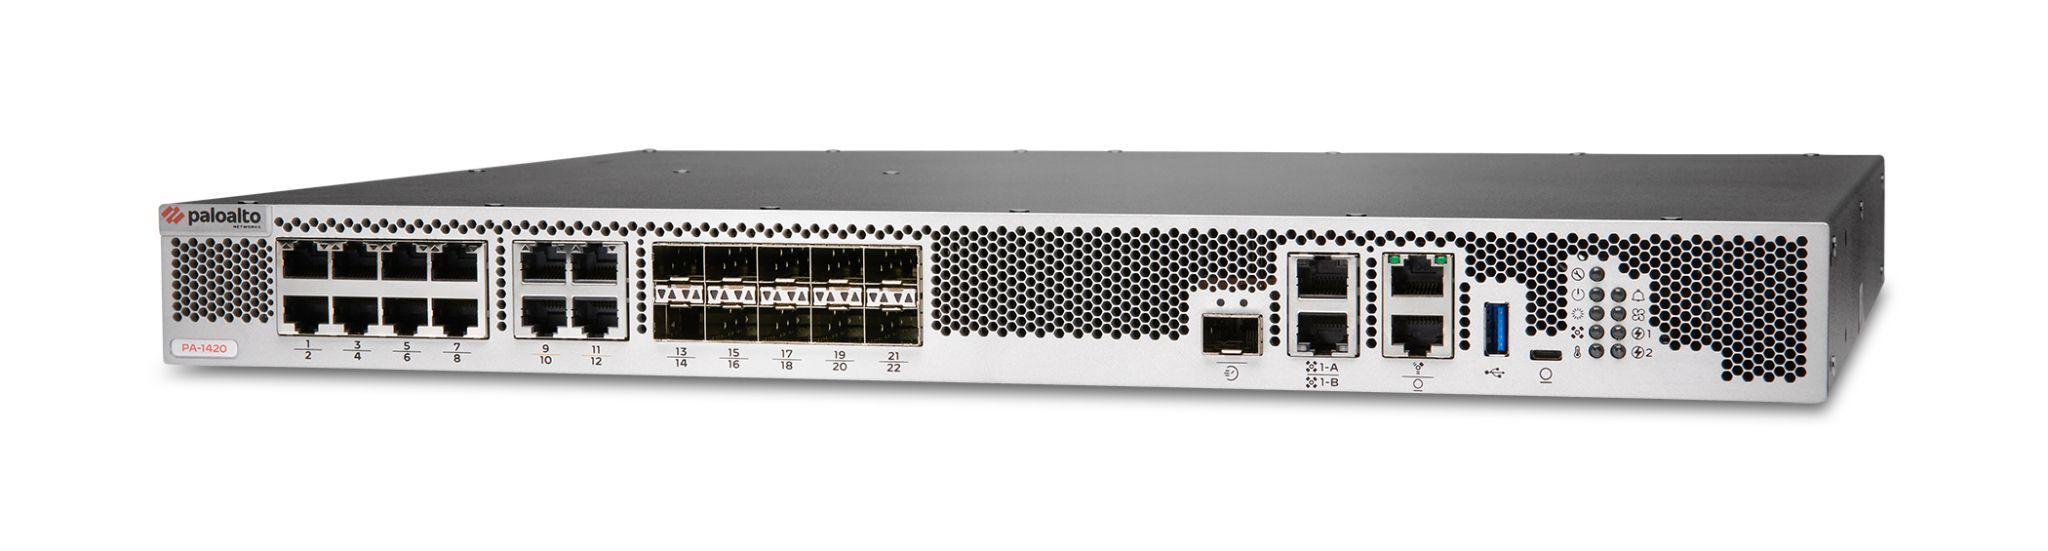 Image of Palo Alto Networks PA-1420 ML-Powered NGFW hardware.